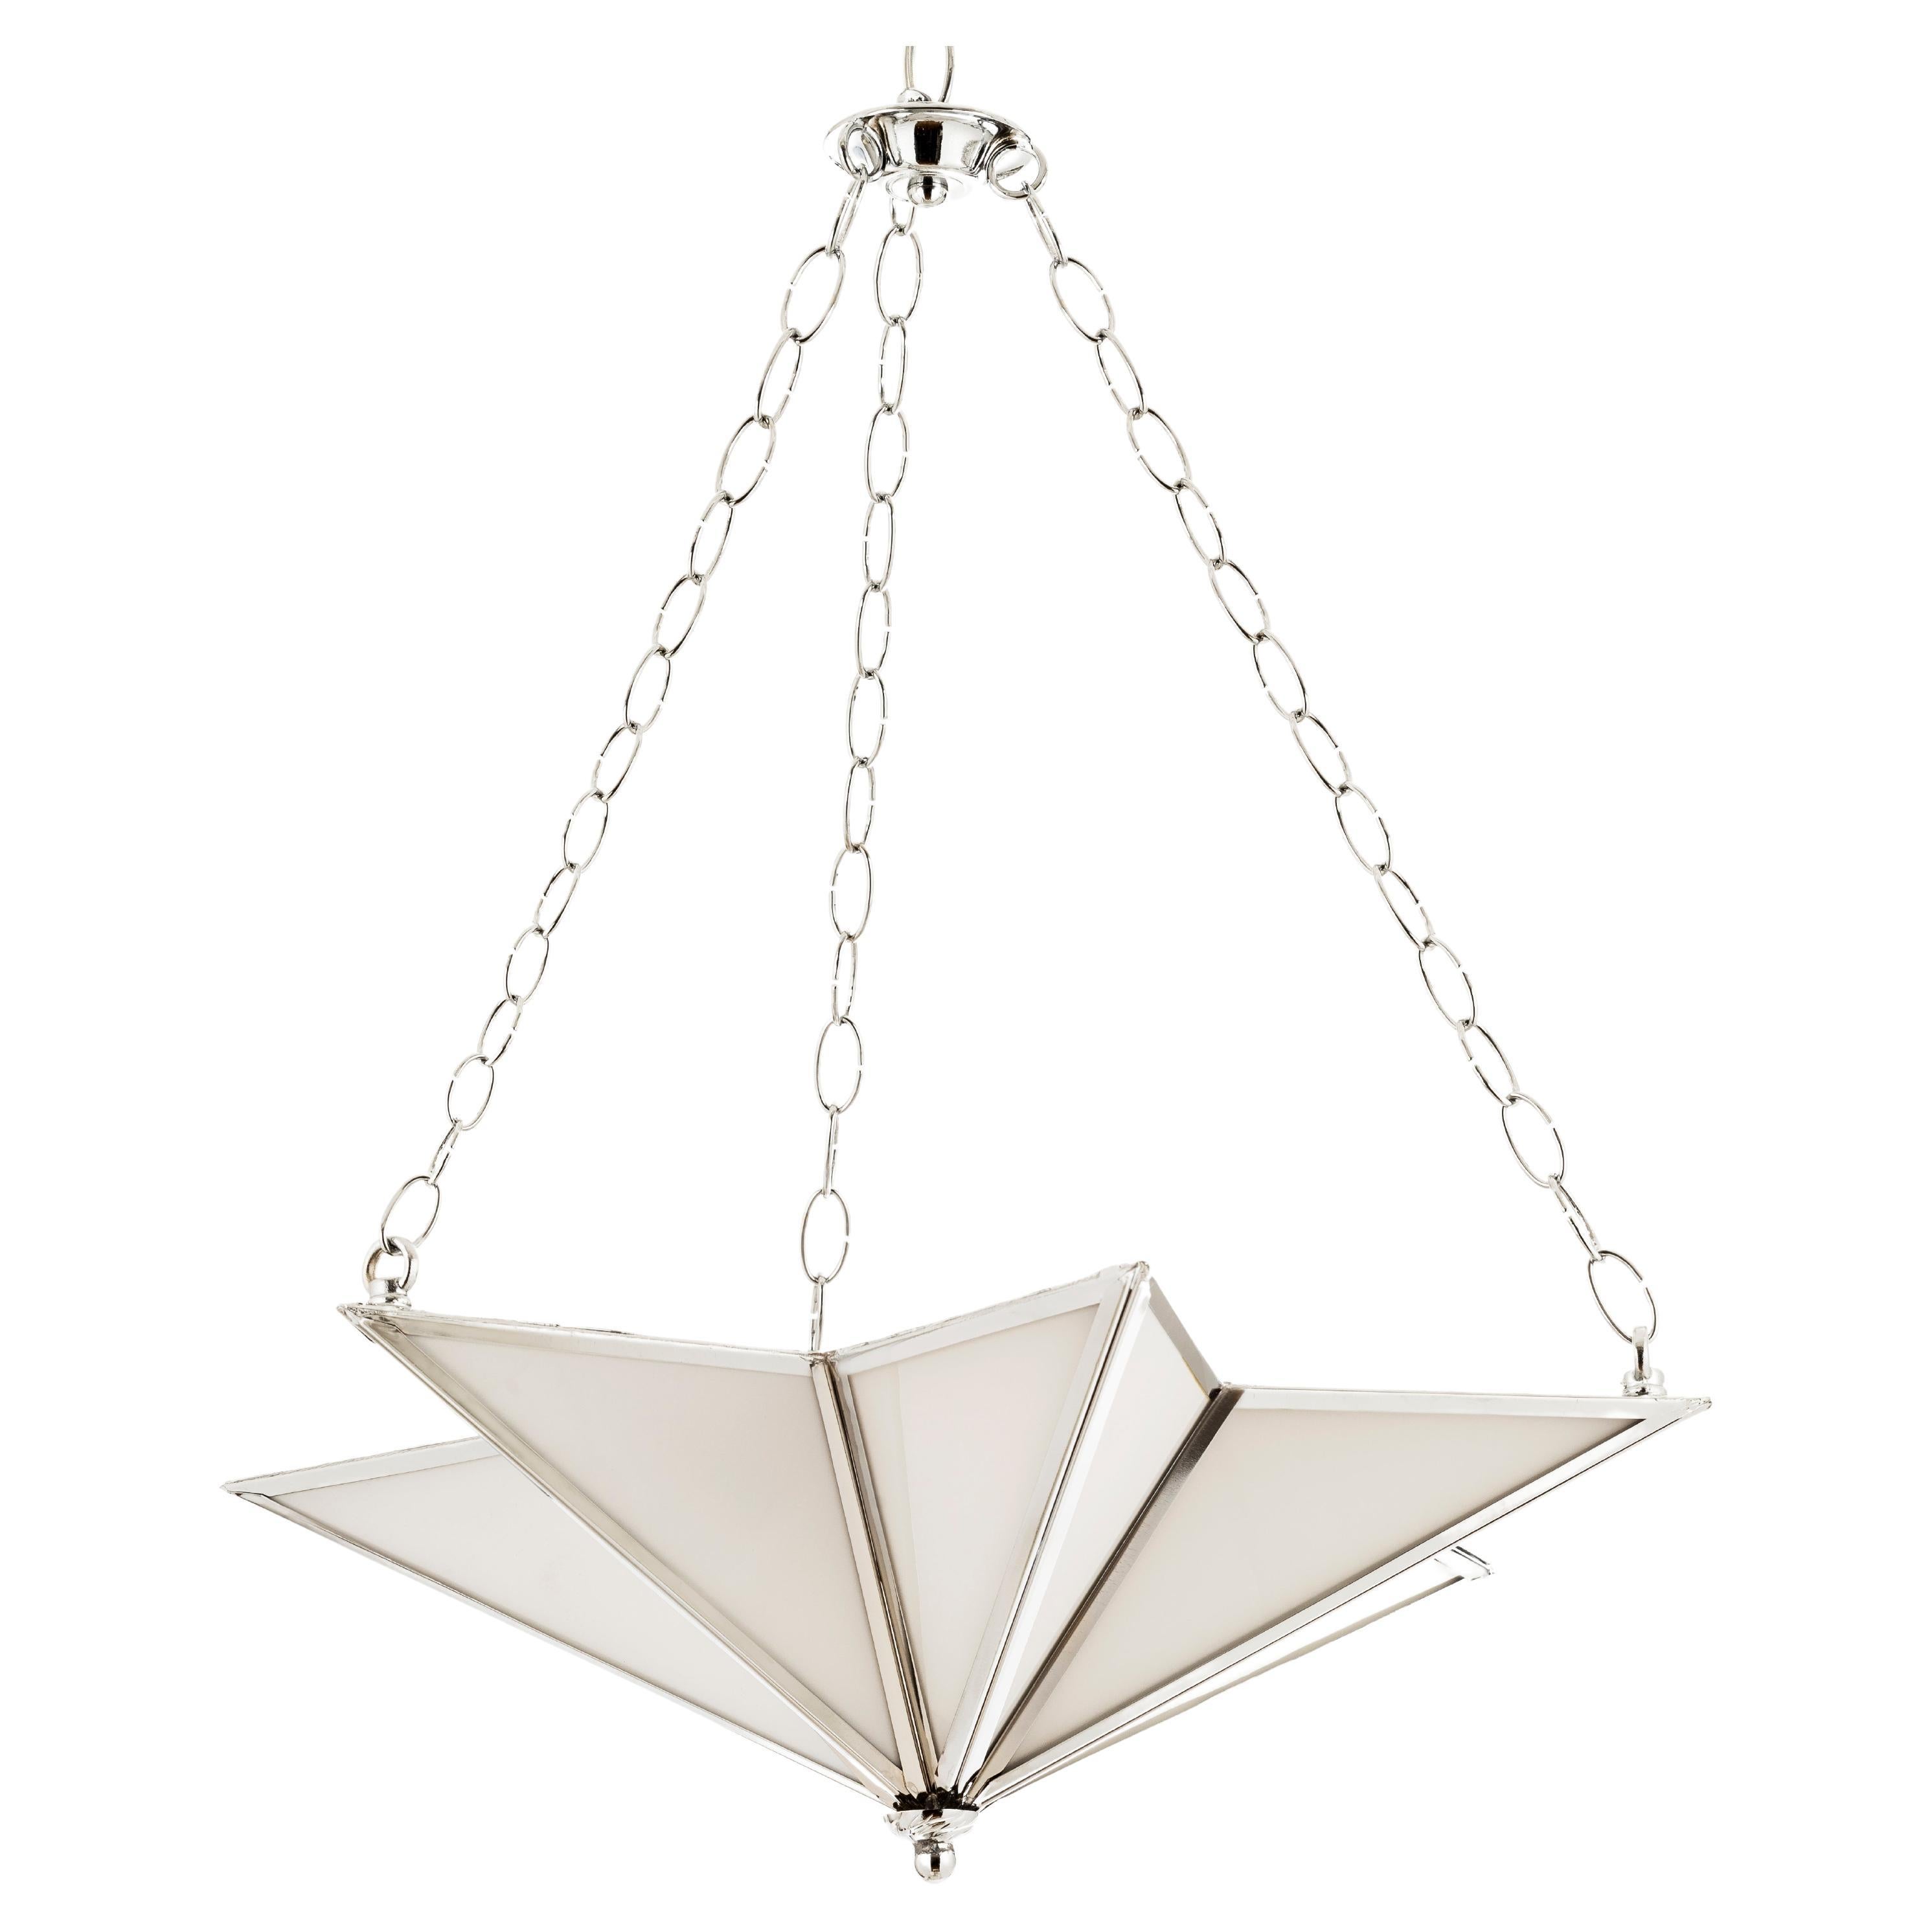 Six Pointed Star Suspension with Brass Structure and Glass For Sale